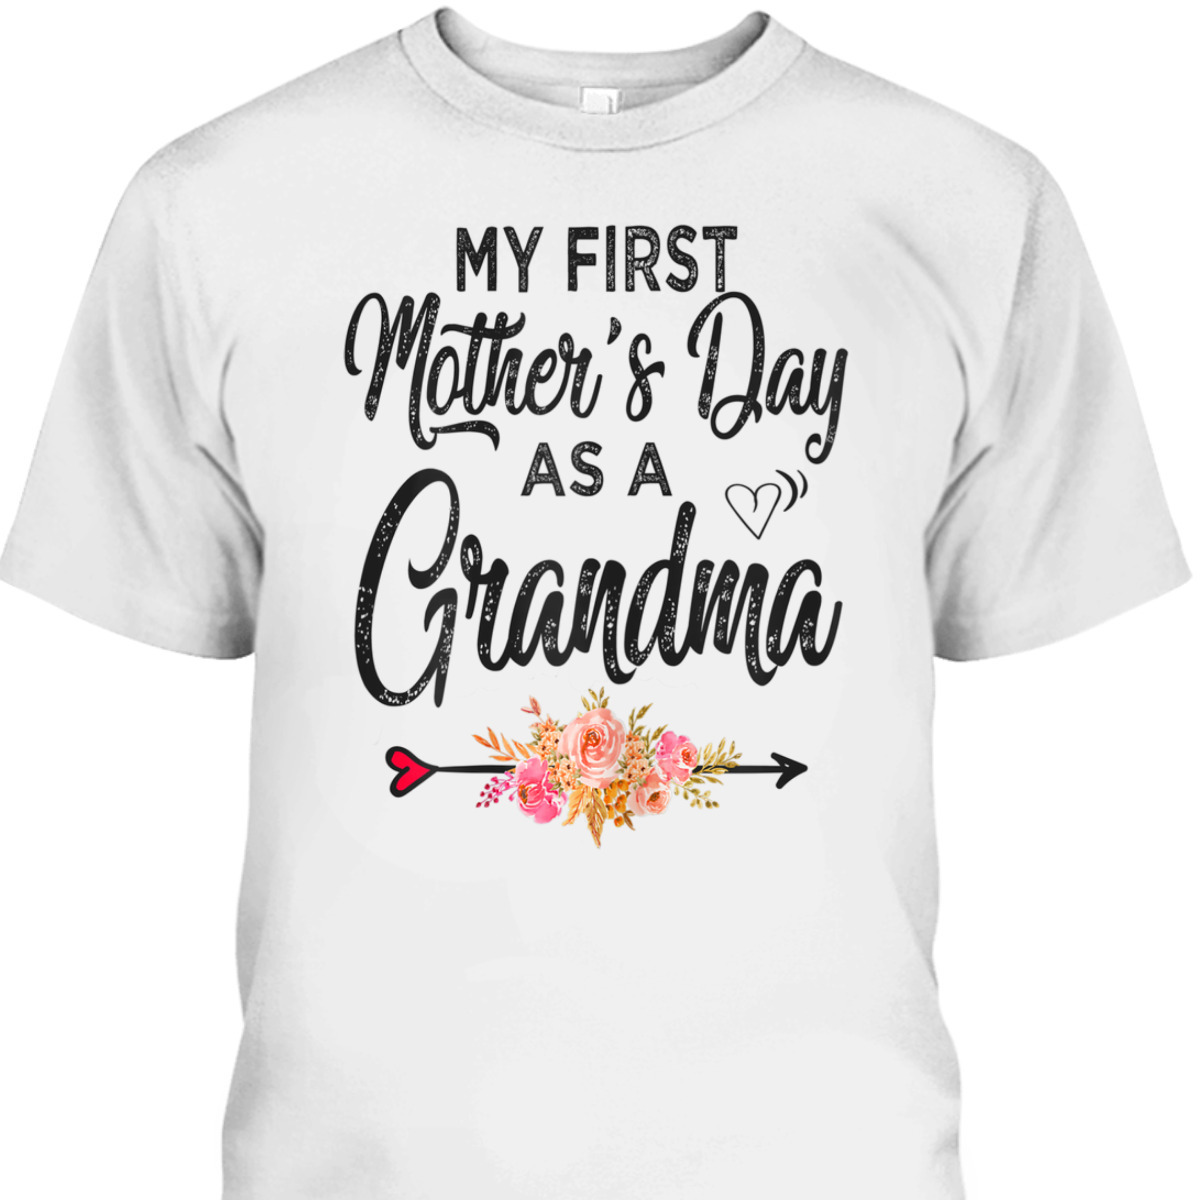 My First Mother's Day As A Grandma T-Shirt